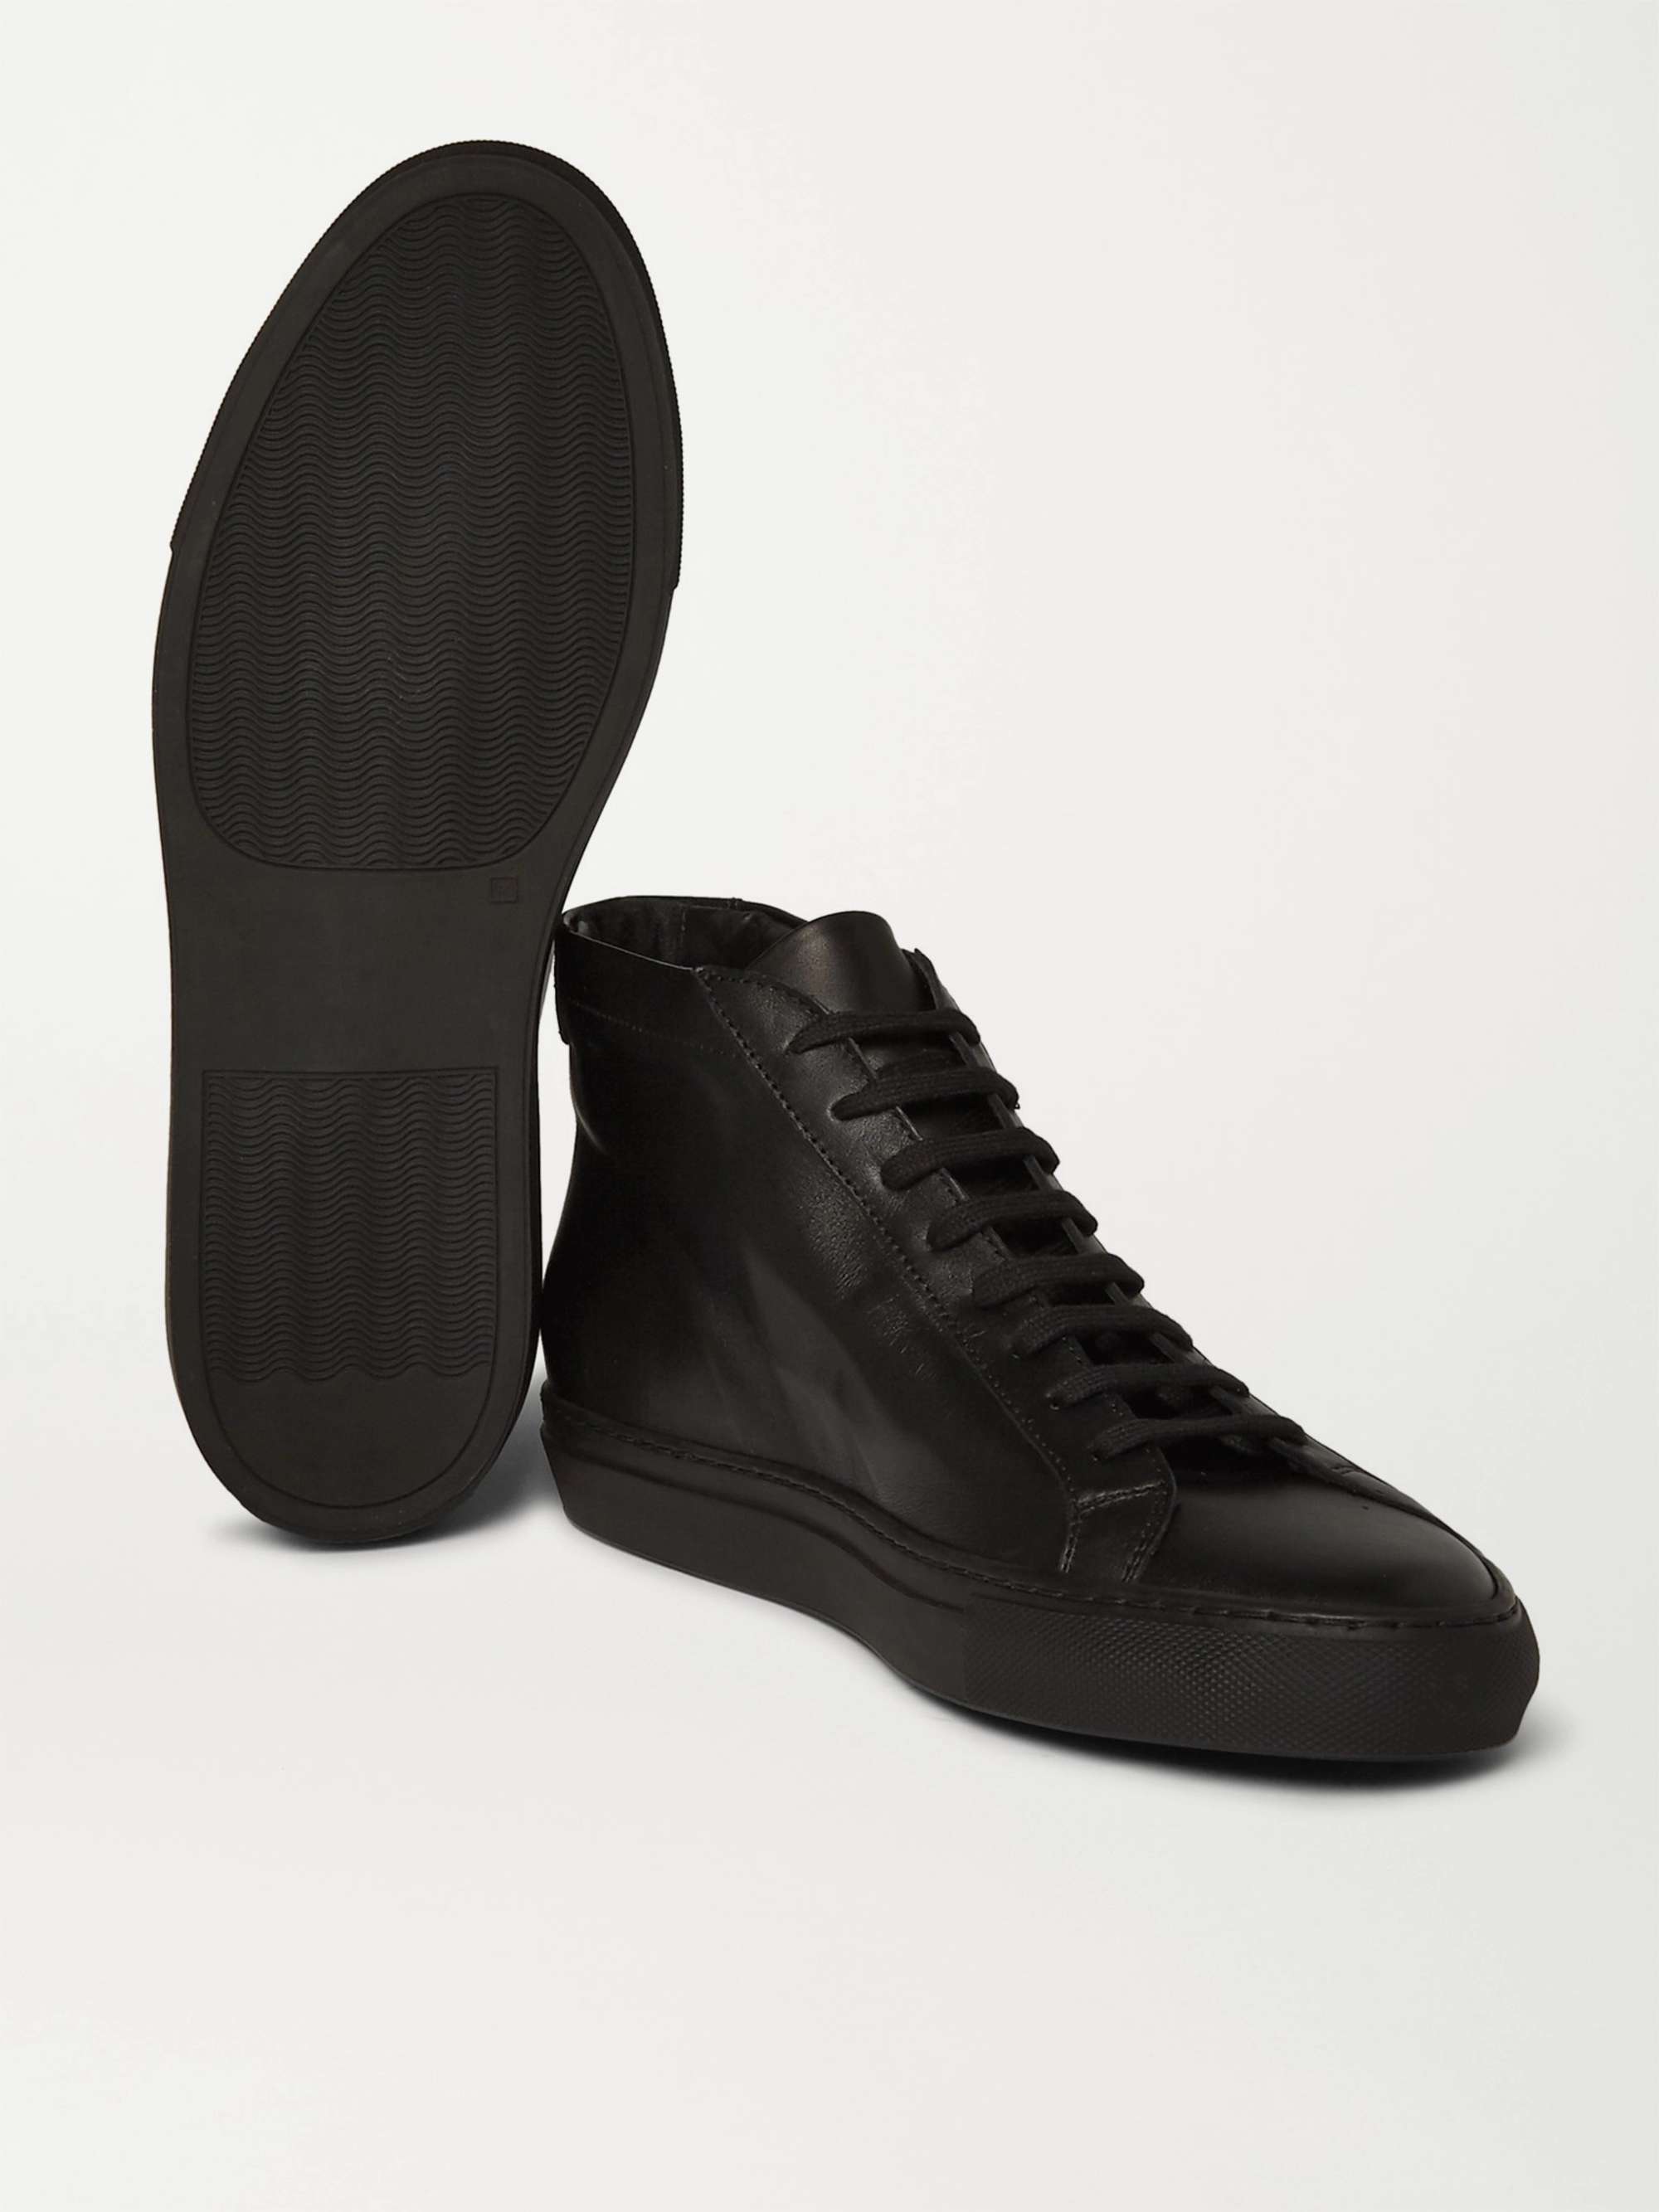 COMMON PROJECTS Original Achilles Leather High-Top Sneakers